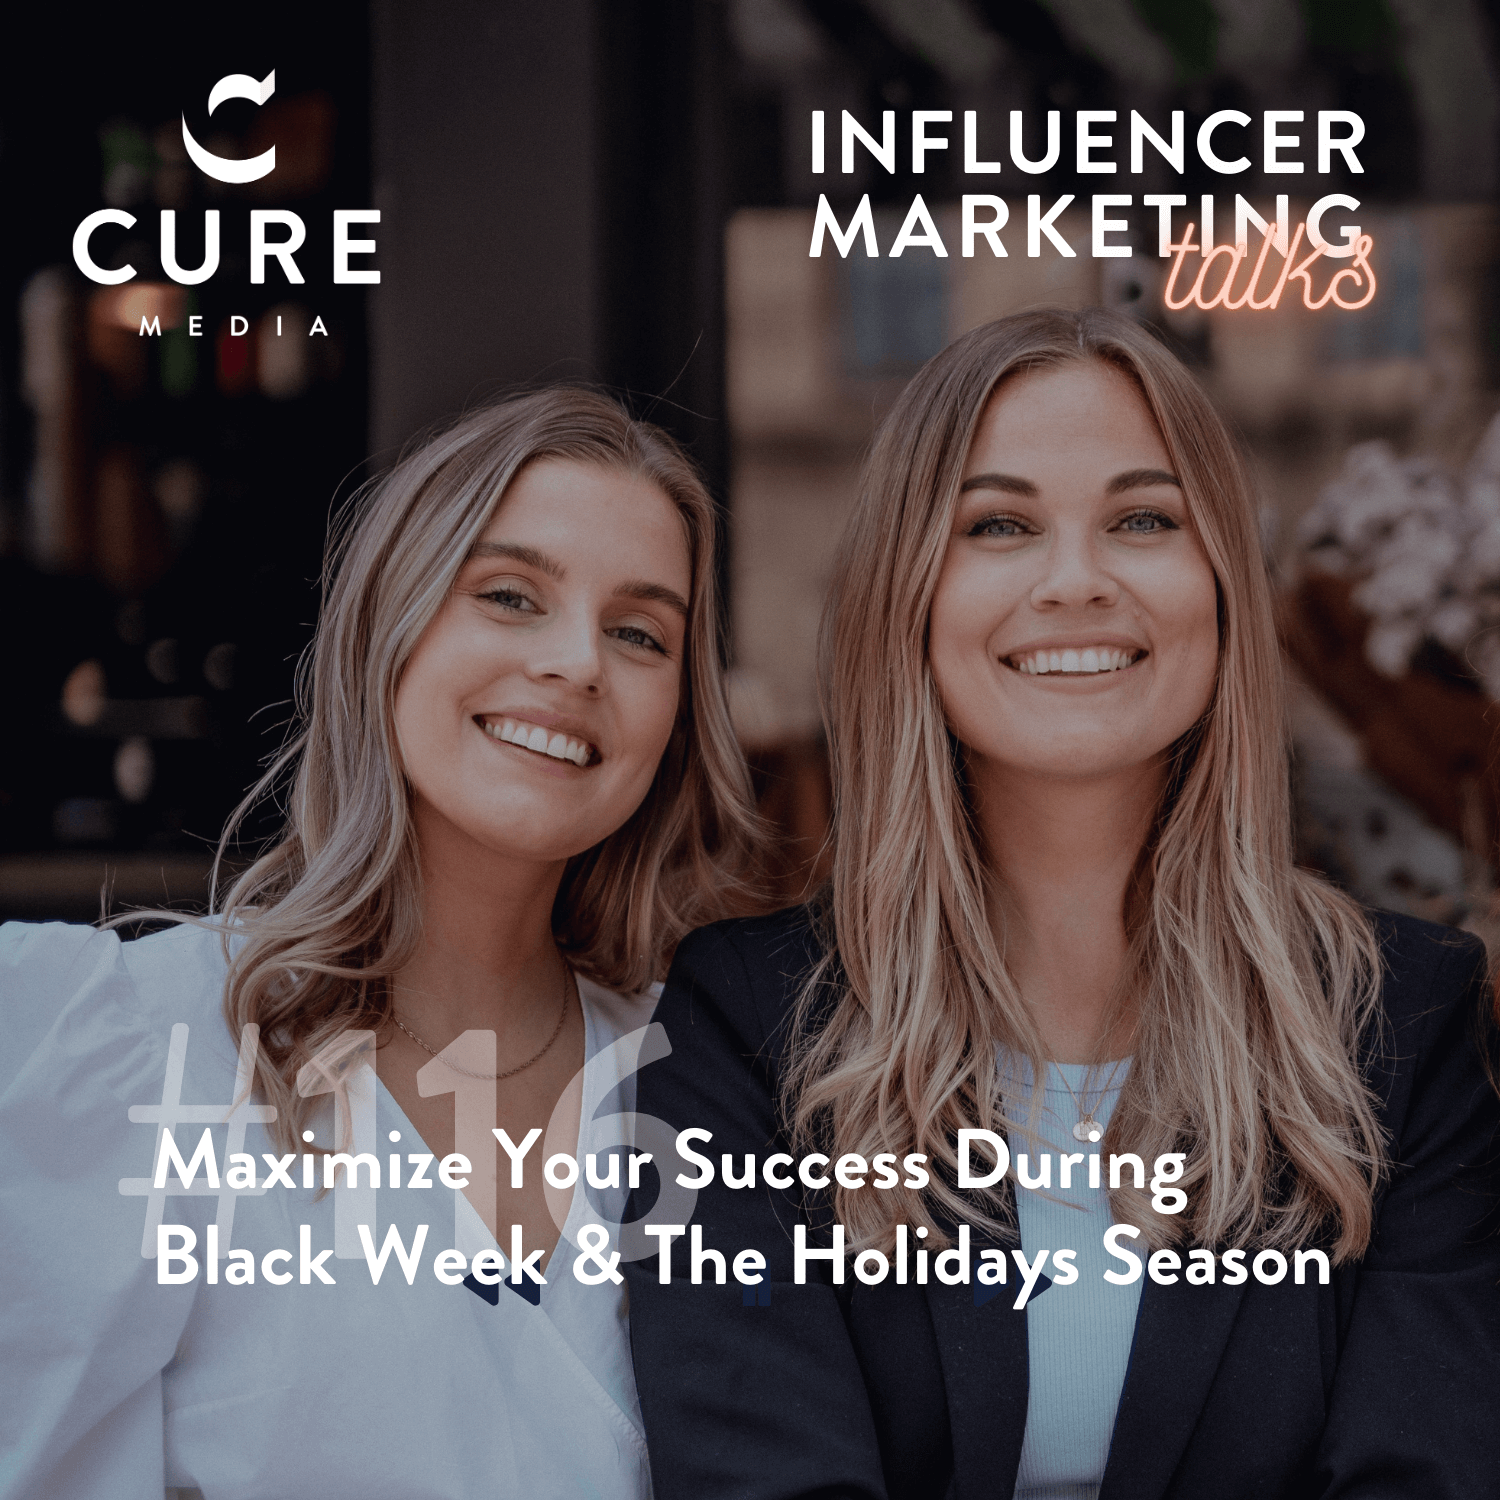 Influencer Marketing Talks - Maximise Your Success During Black Week and the Holidays Season